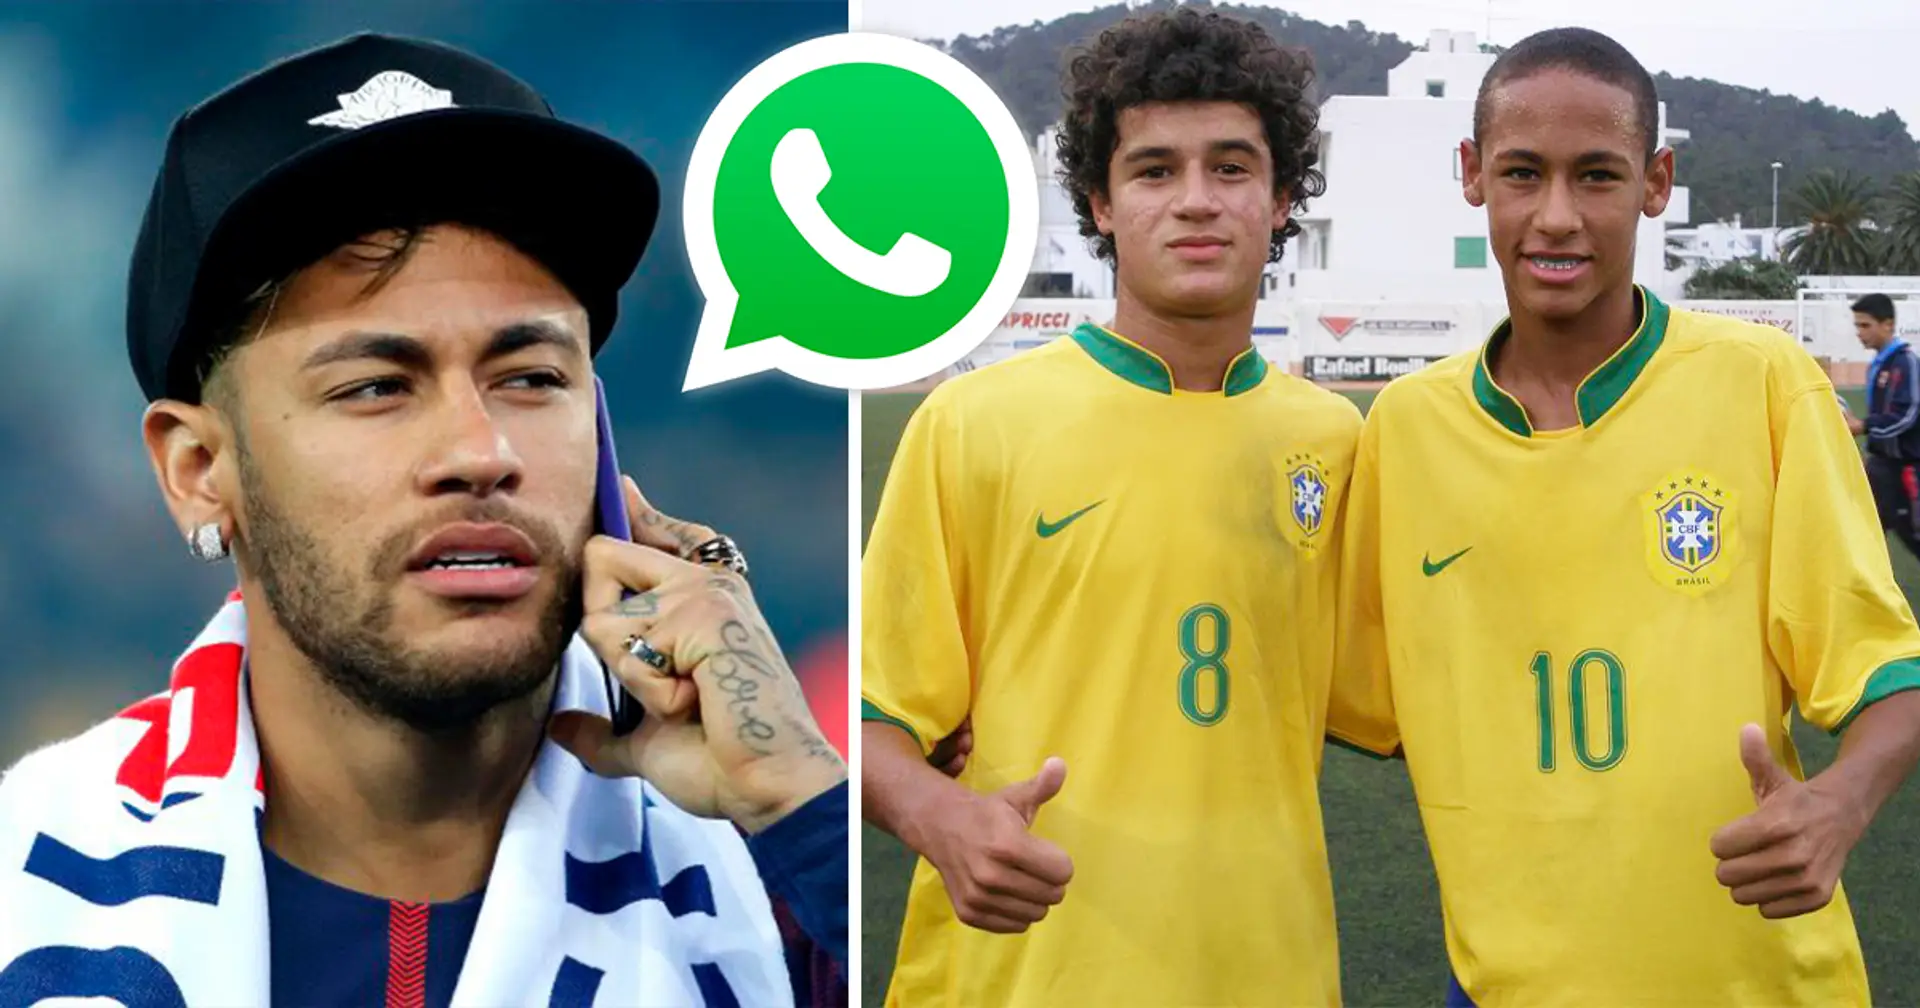 Neymar's private WhatsApp message to Philippe Coutinho that holds unfulfilled potential